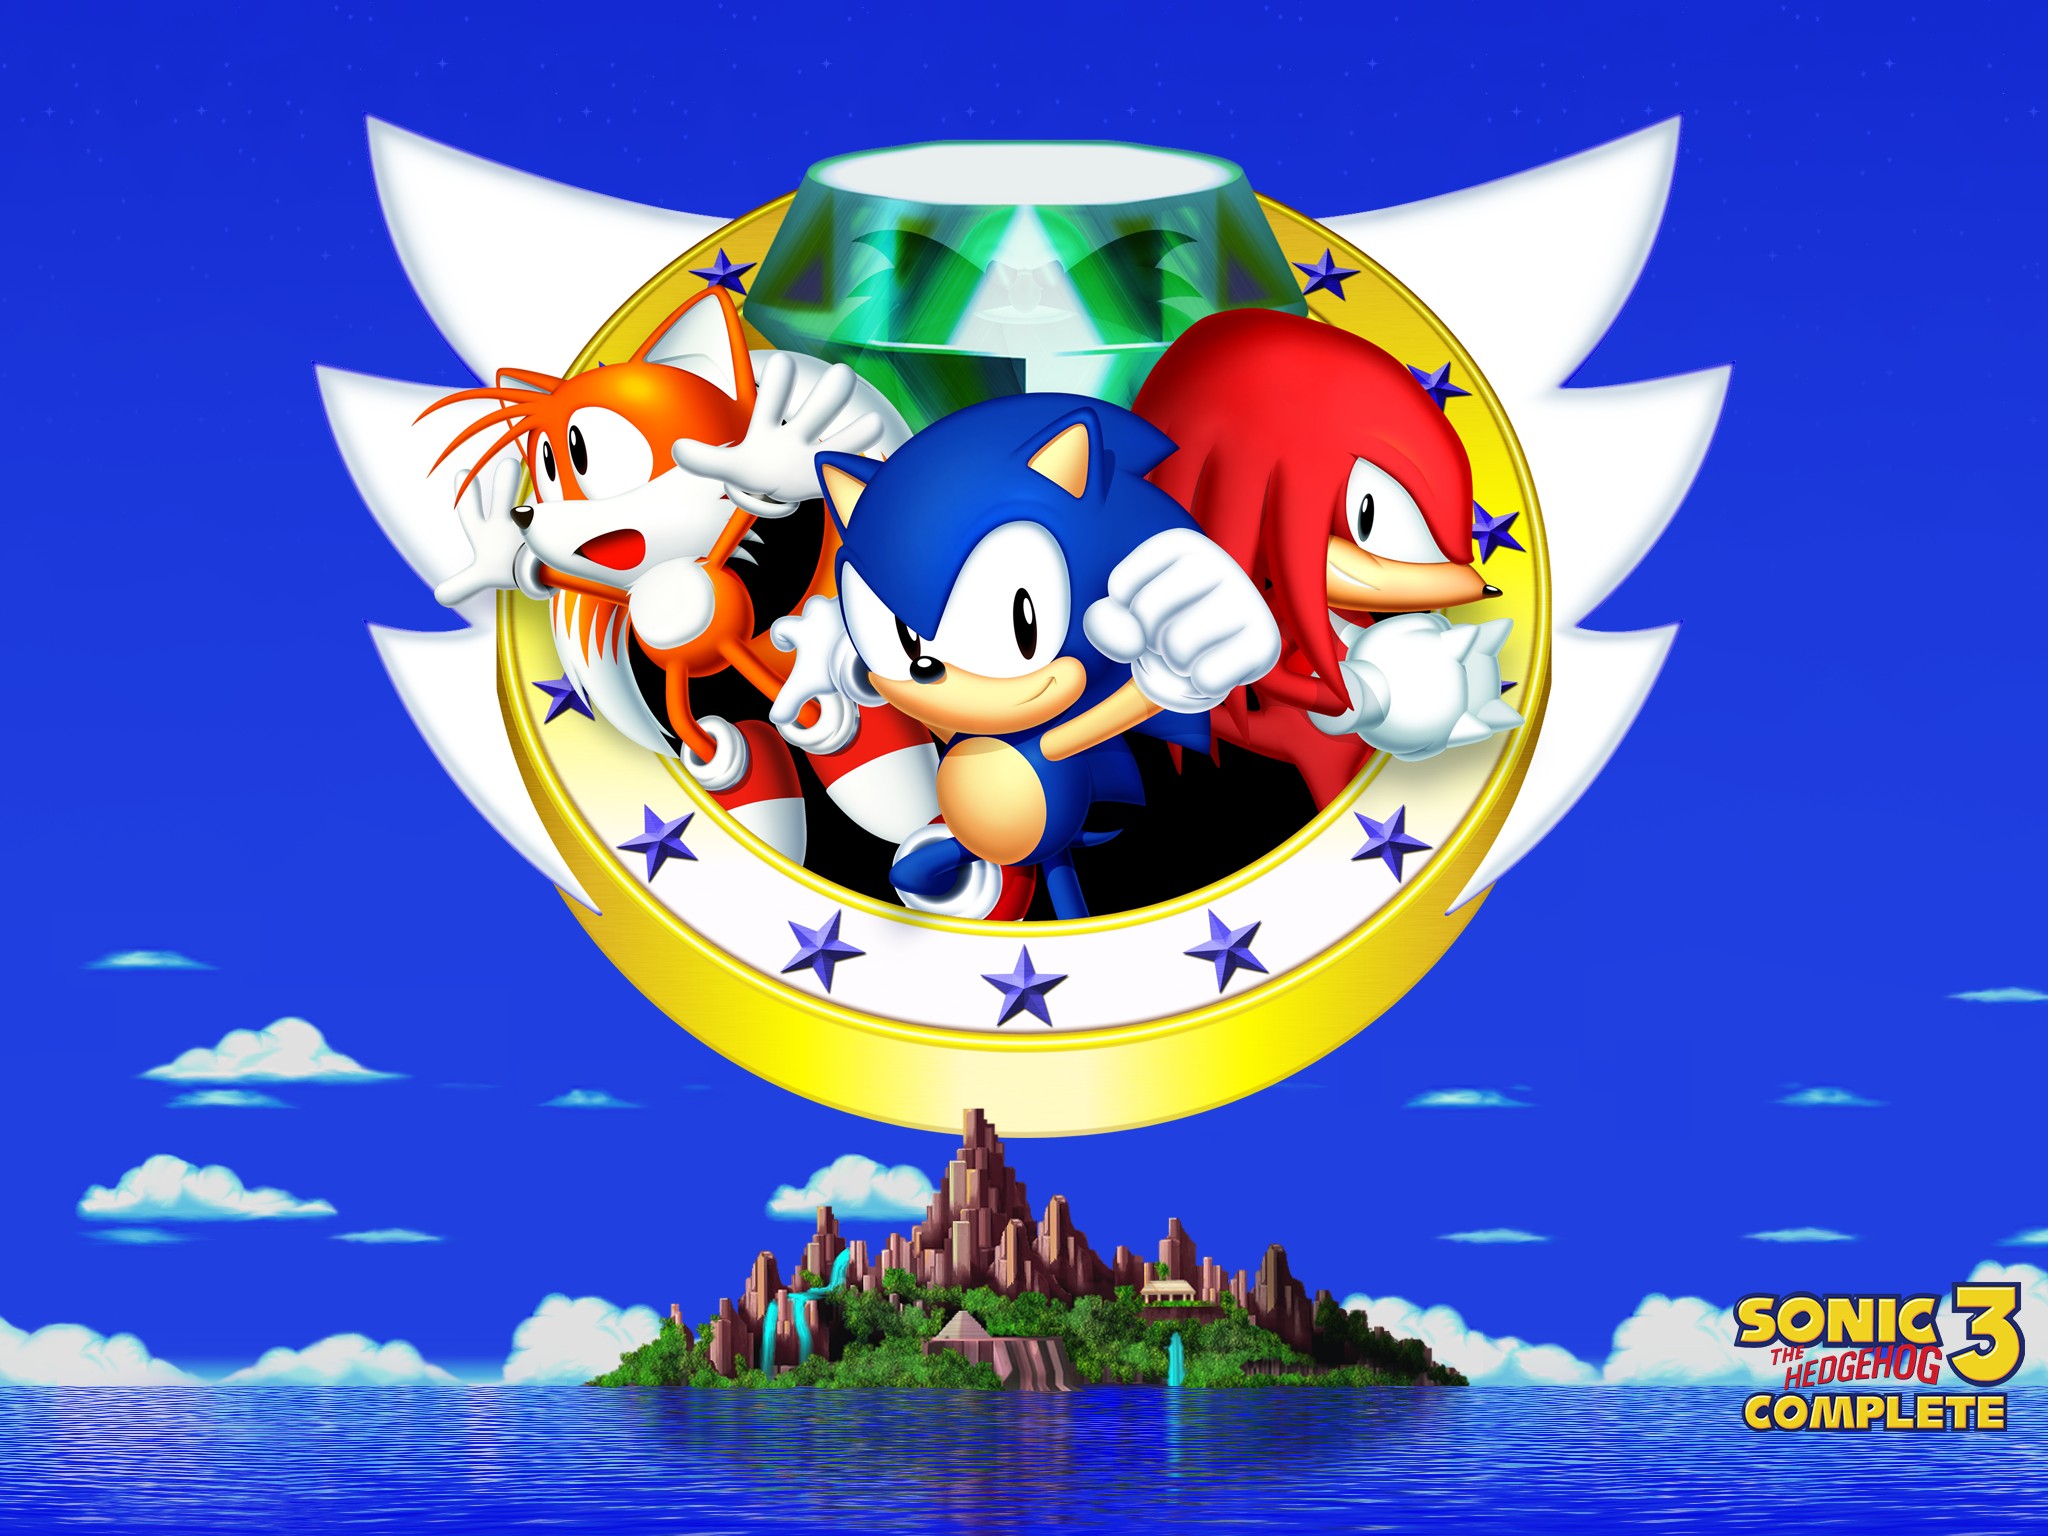 Tails (character), Sonic, Knuckles Wallpaper HD / Desktop and Mobile Background